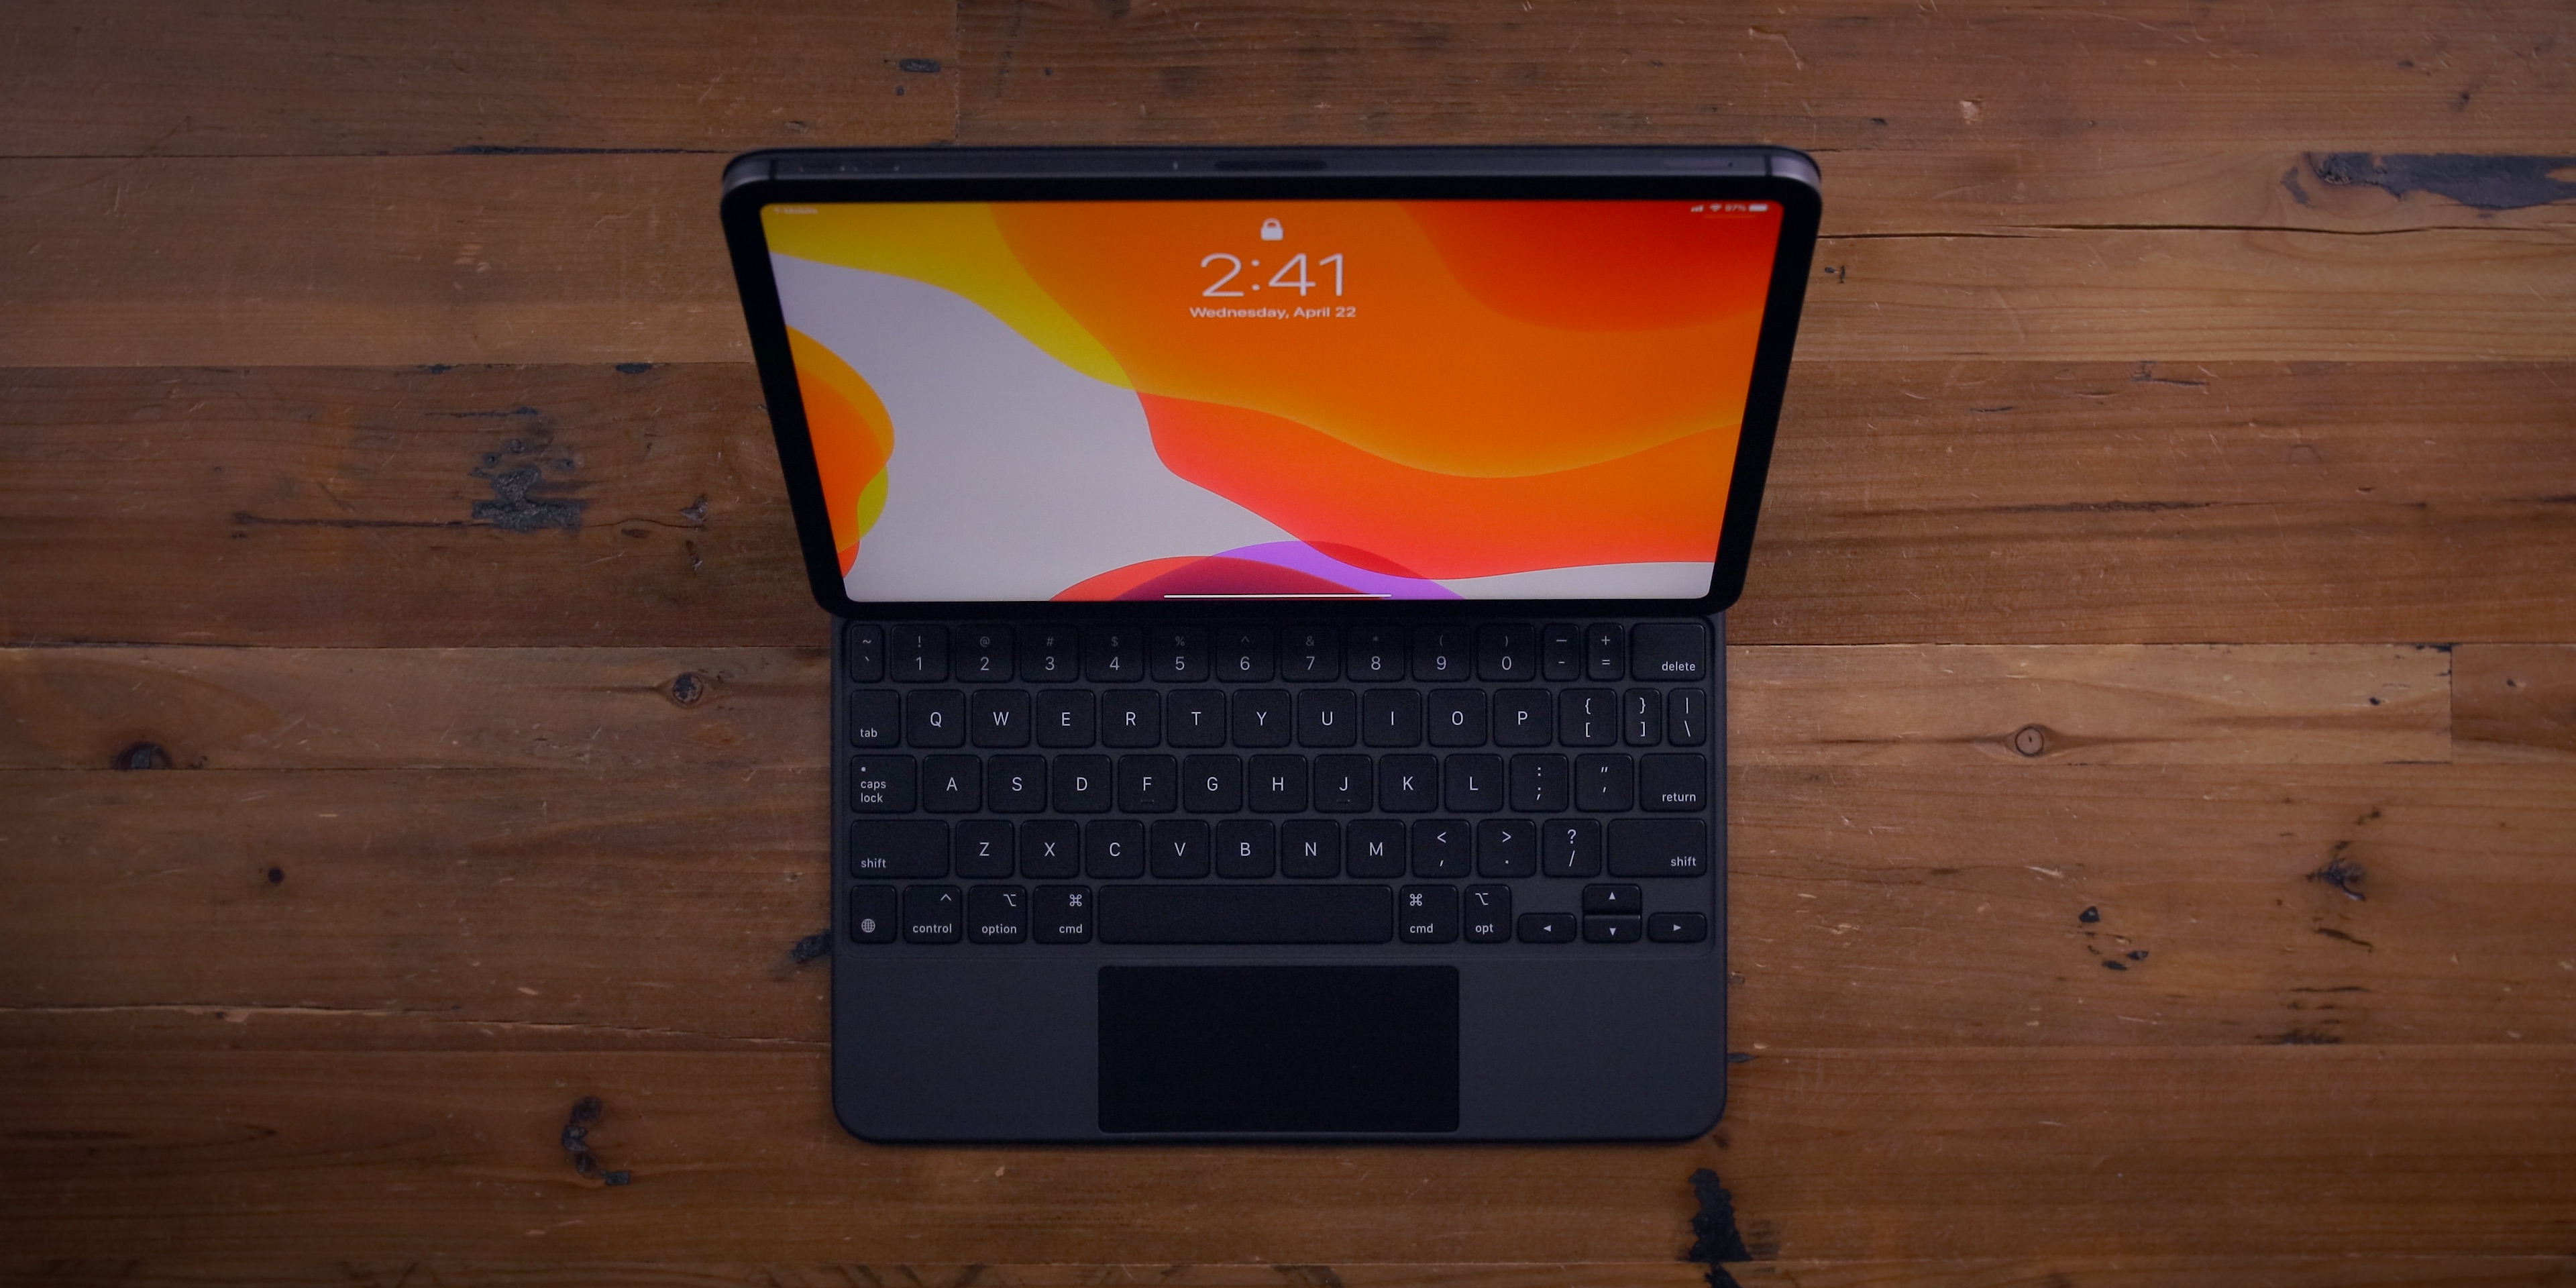 Magic Keyboard for iPad Pro top features — the best iPad accessory ever